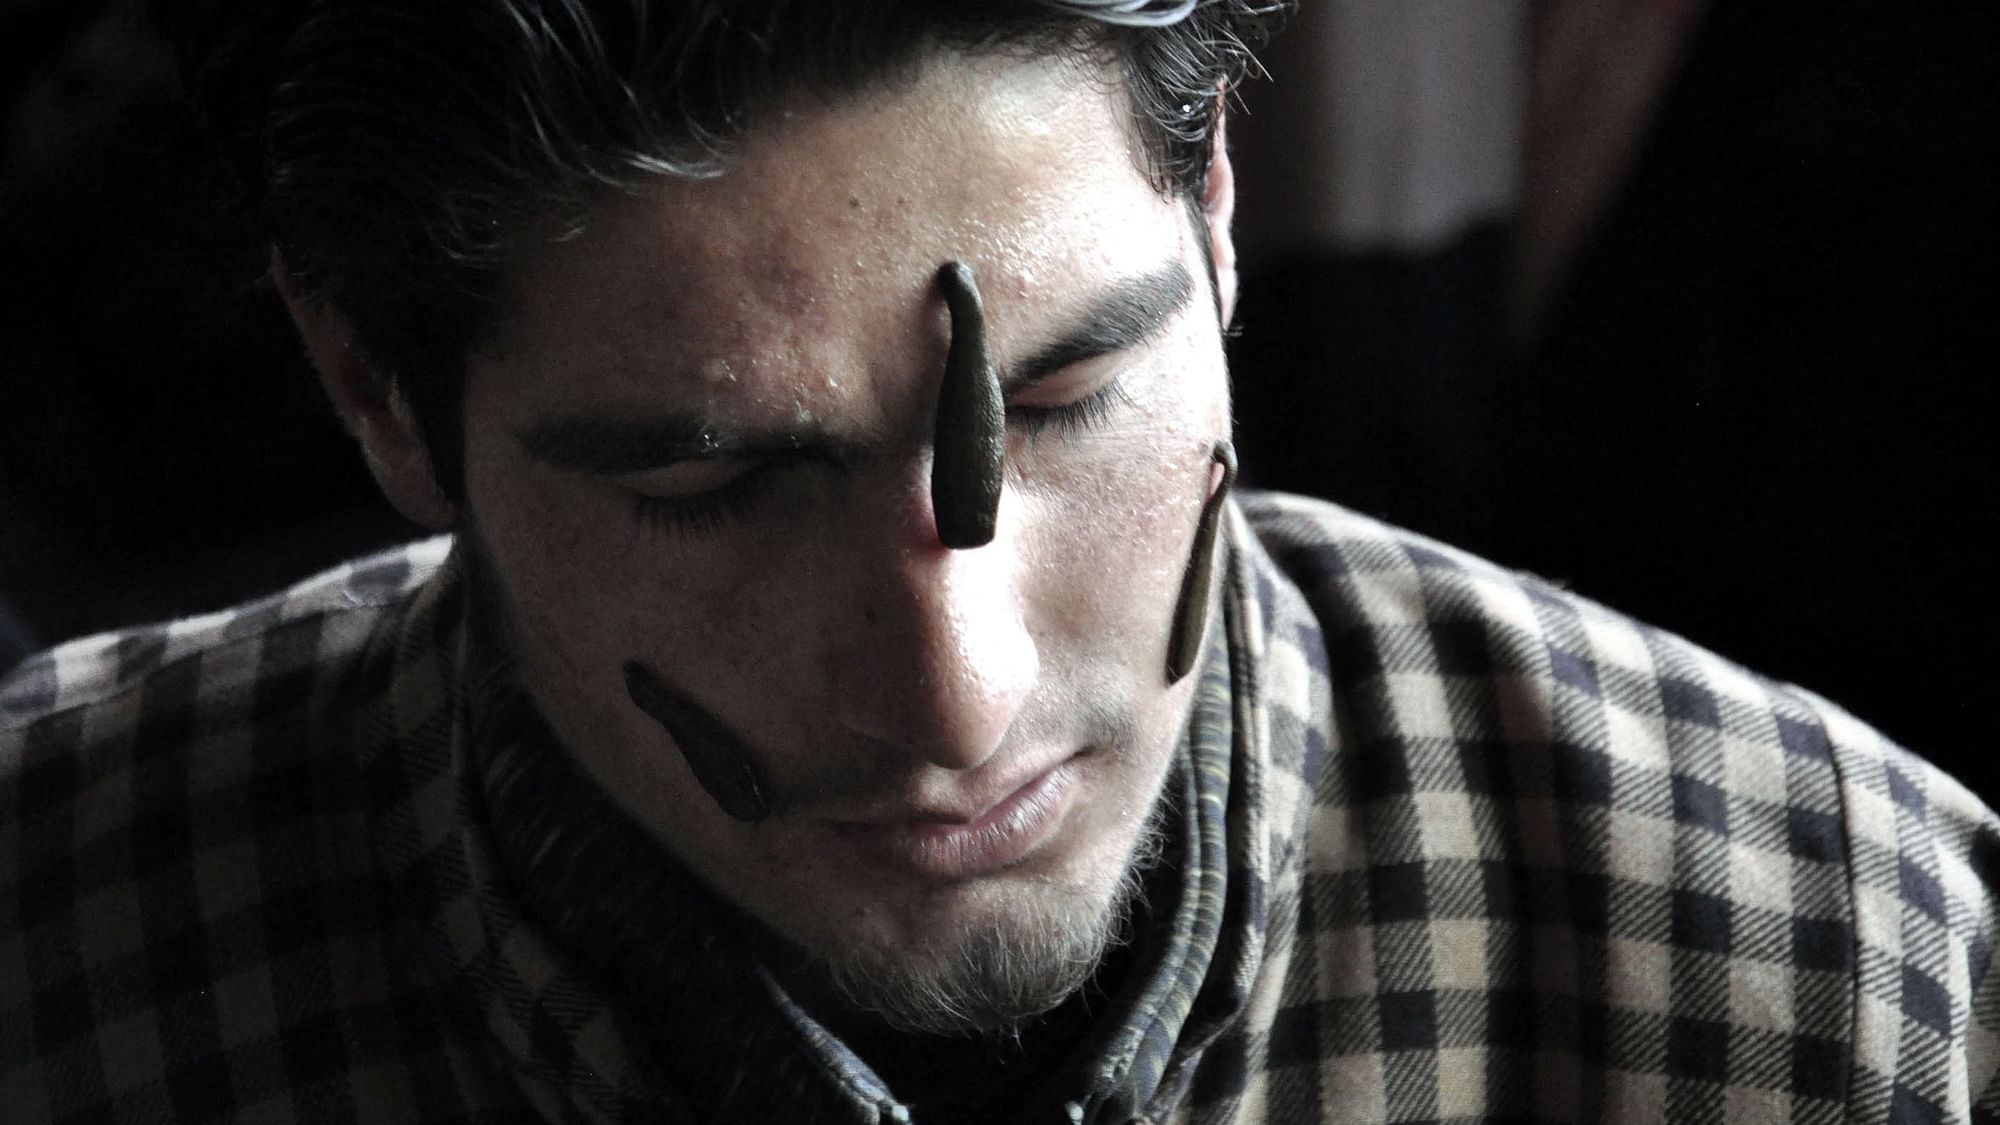 Image of a Kashmiri man undergoing ‘leech therapy’. Image used for representational purposes.